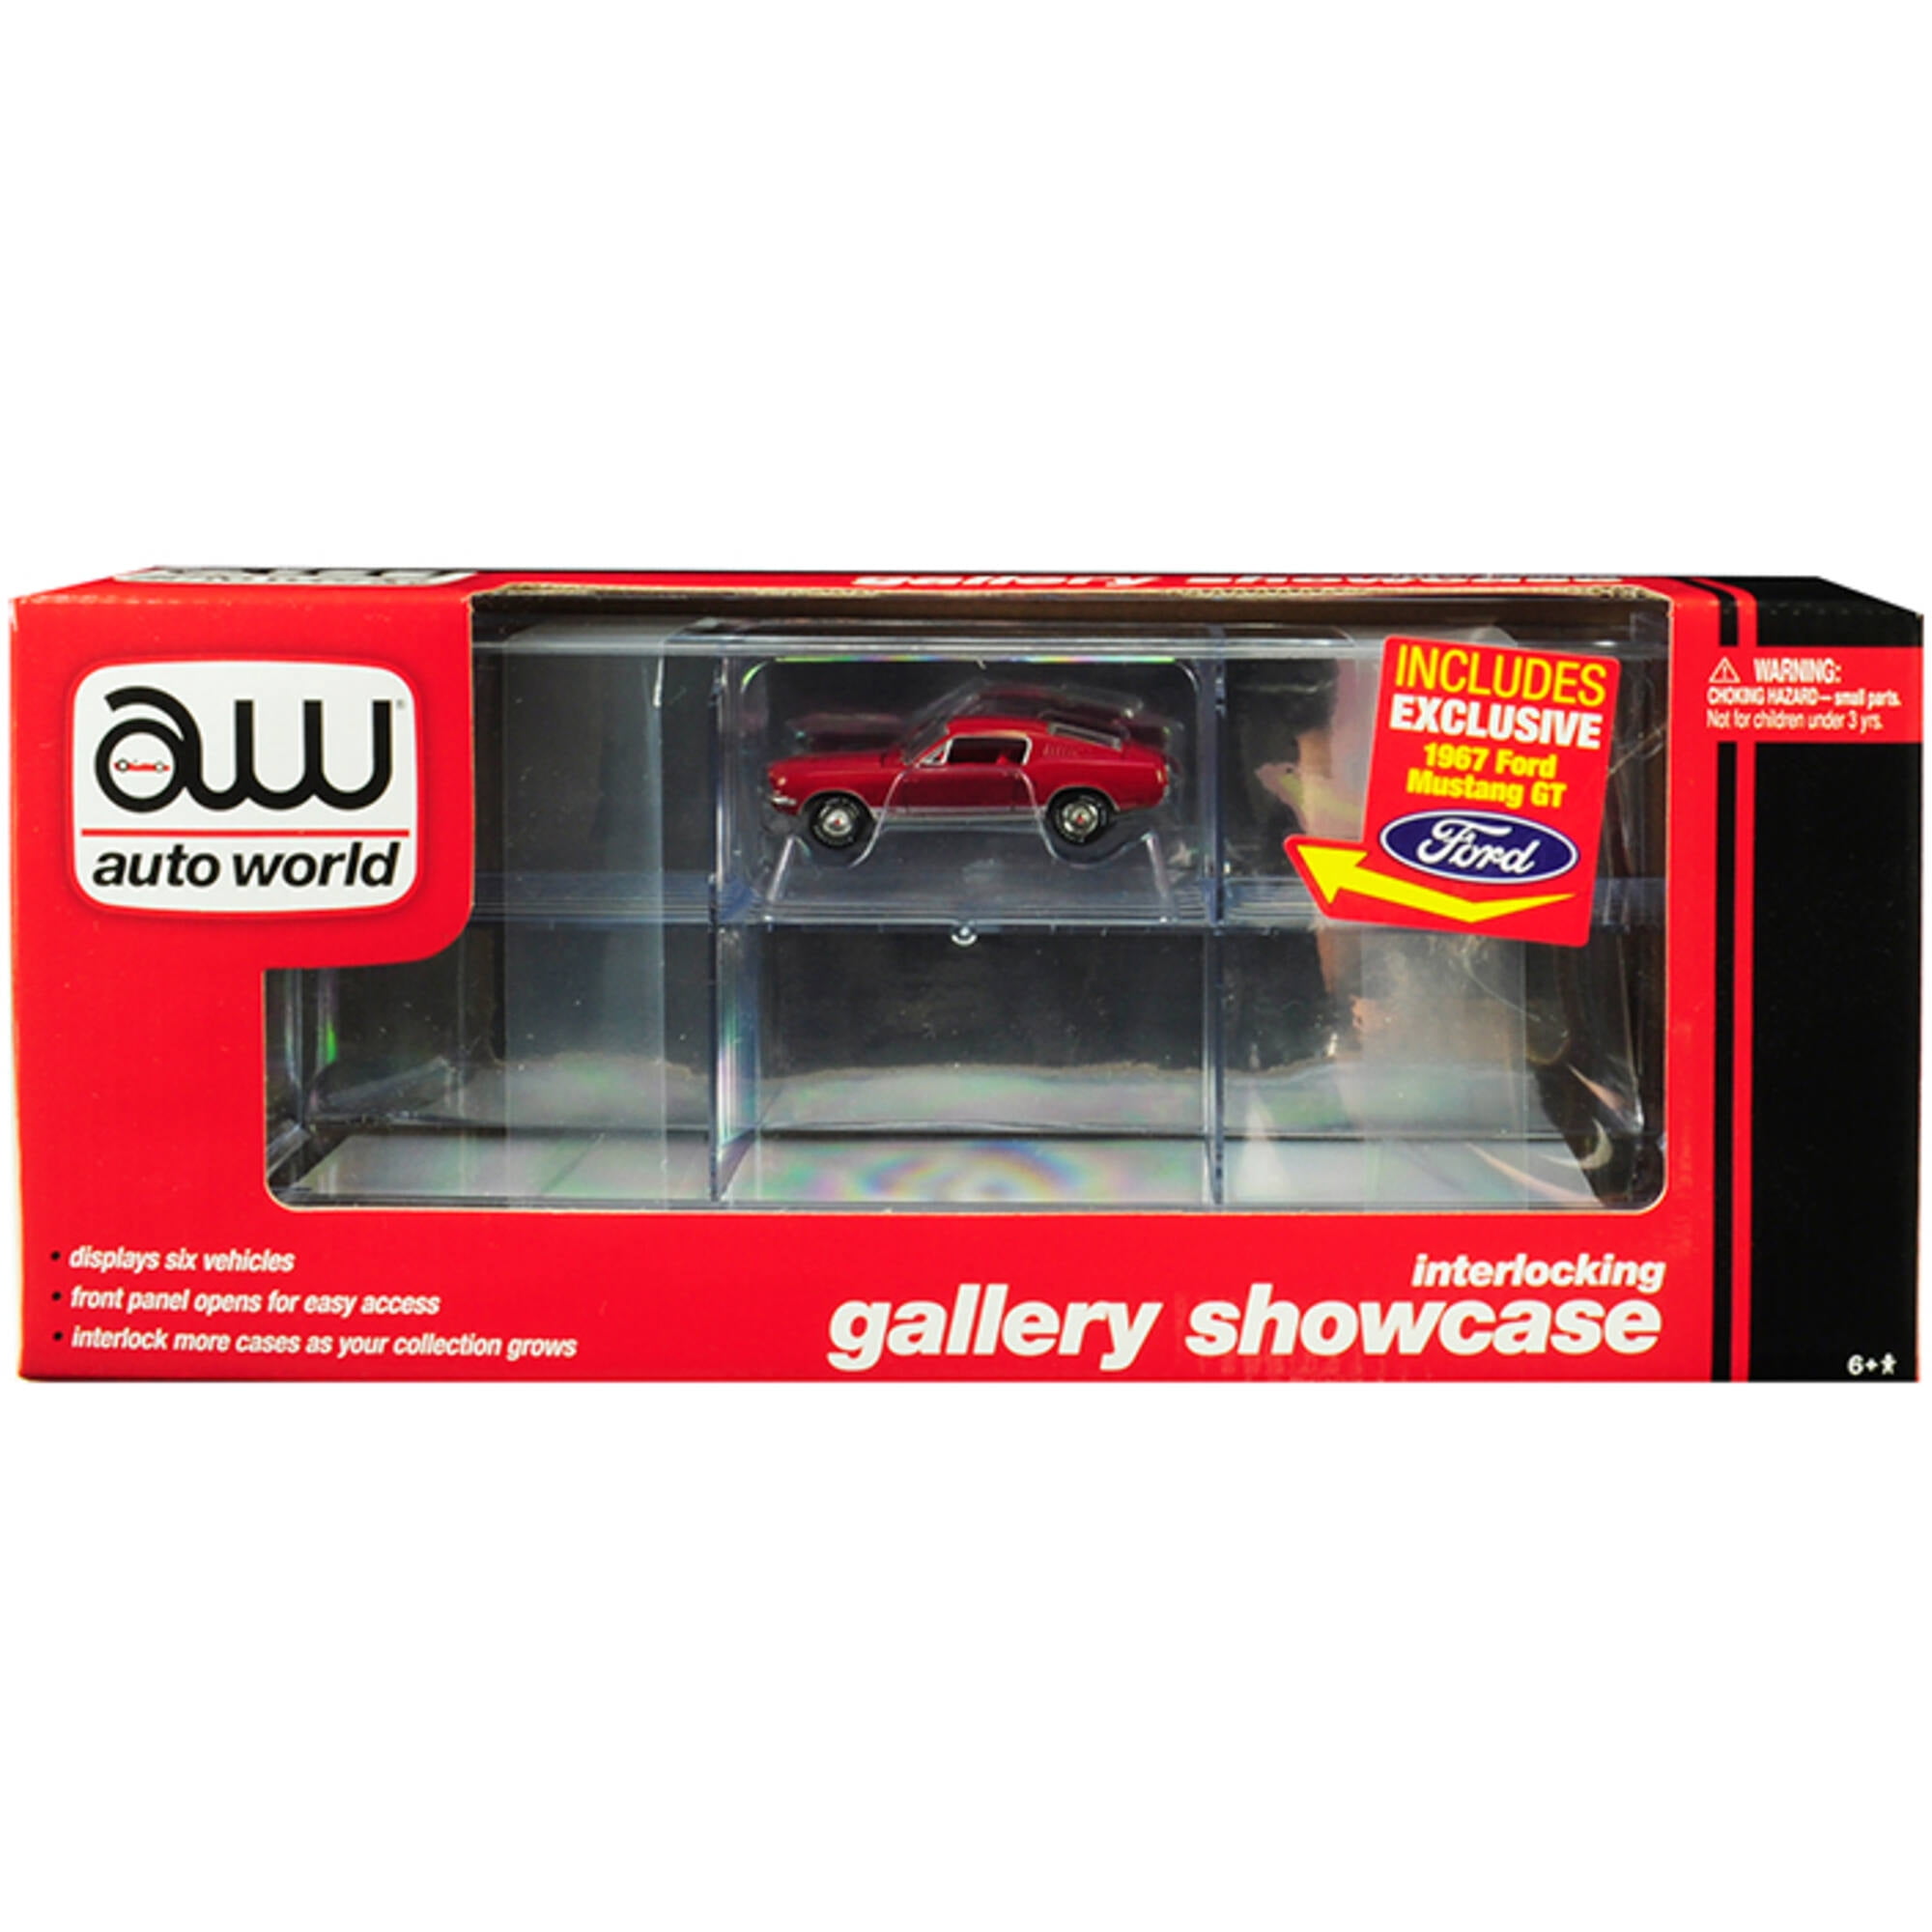 Autoworld AWDC018 1 by 64 Scale 6 Car Interlocking Acrylic Display Show Case for 1967 Ford Mustang GT Model Cars, Red -  AUTO WORLD